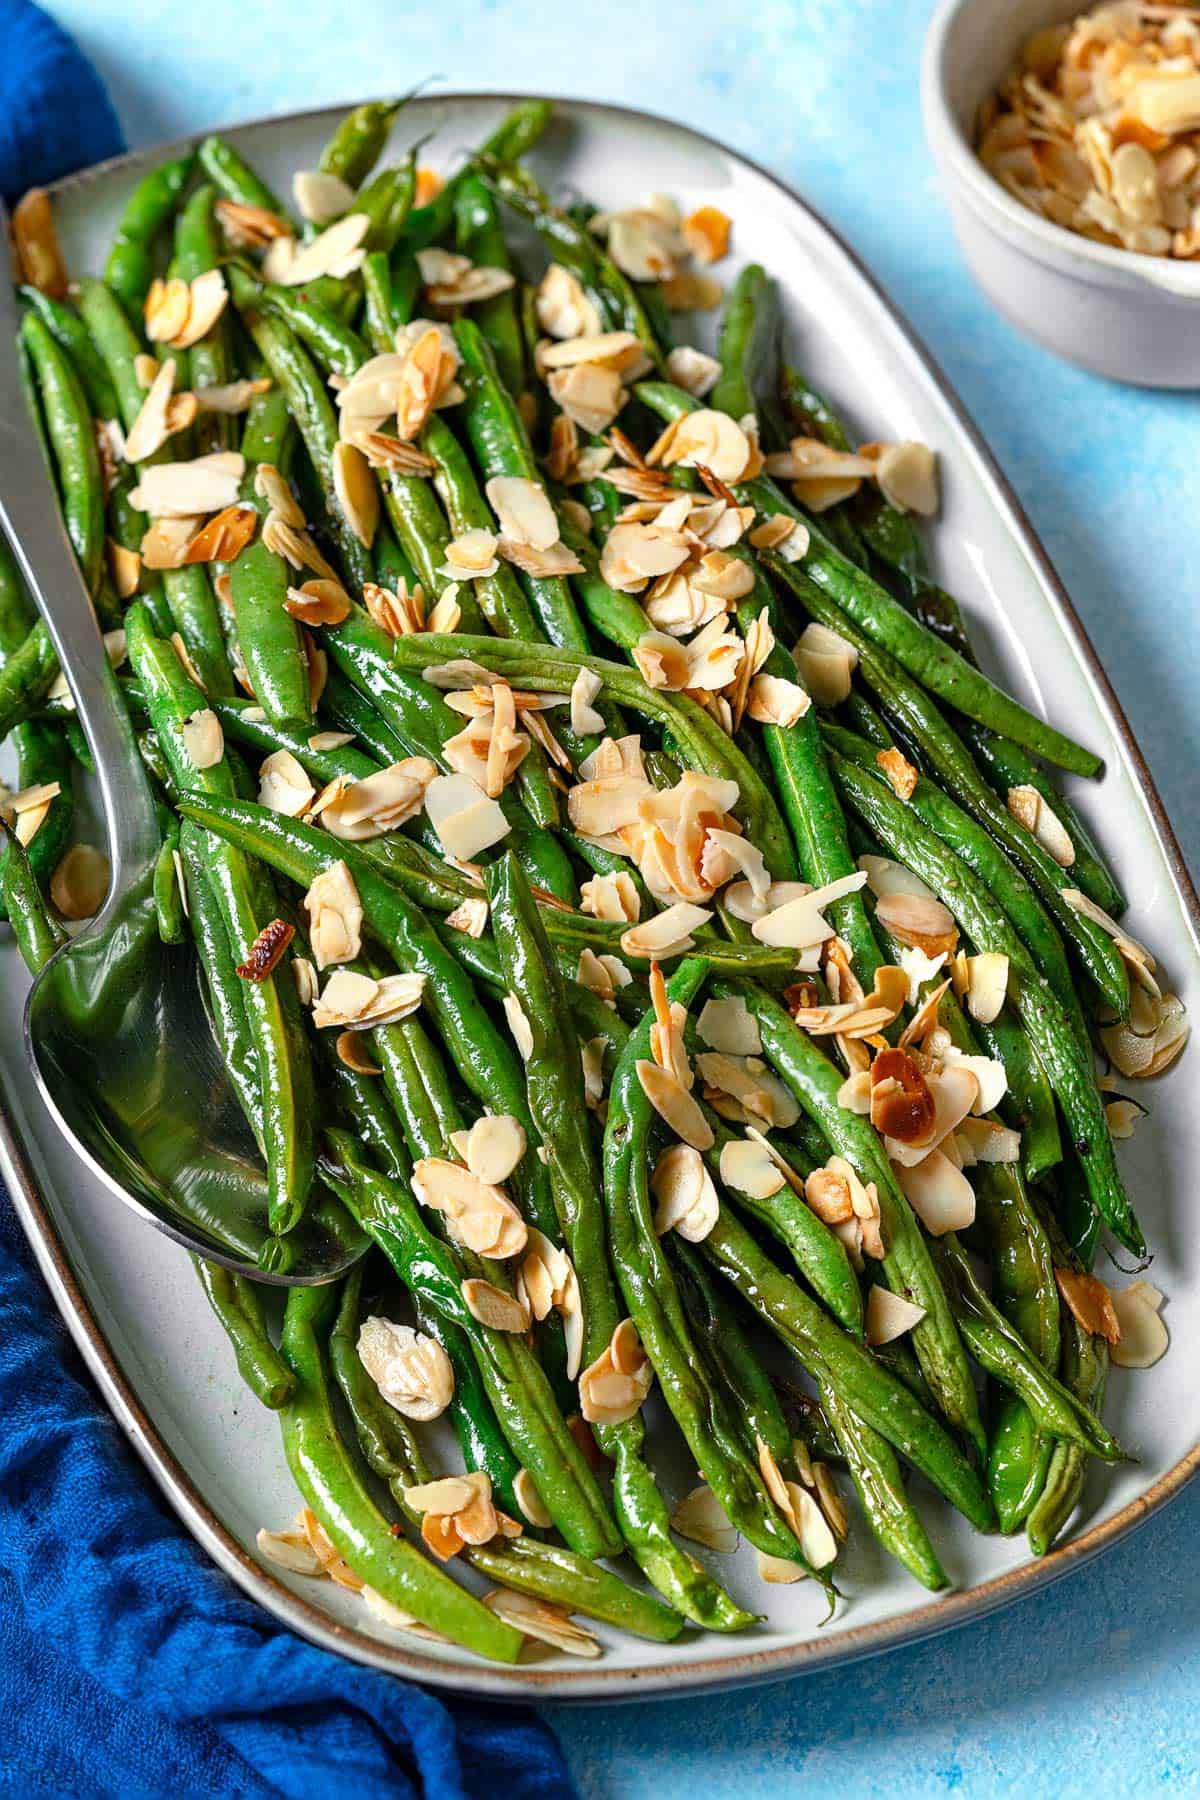 a serving platter of roasted green beans garnished with sliced almonds with a serving spoon.